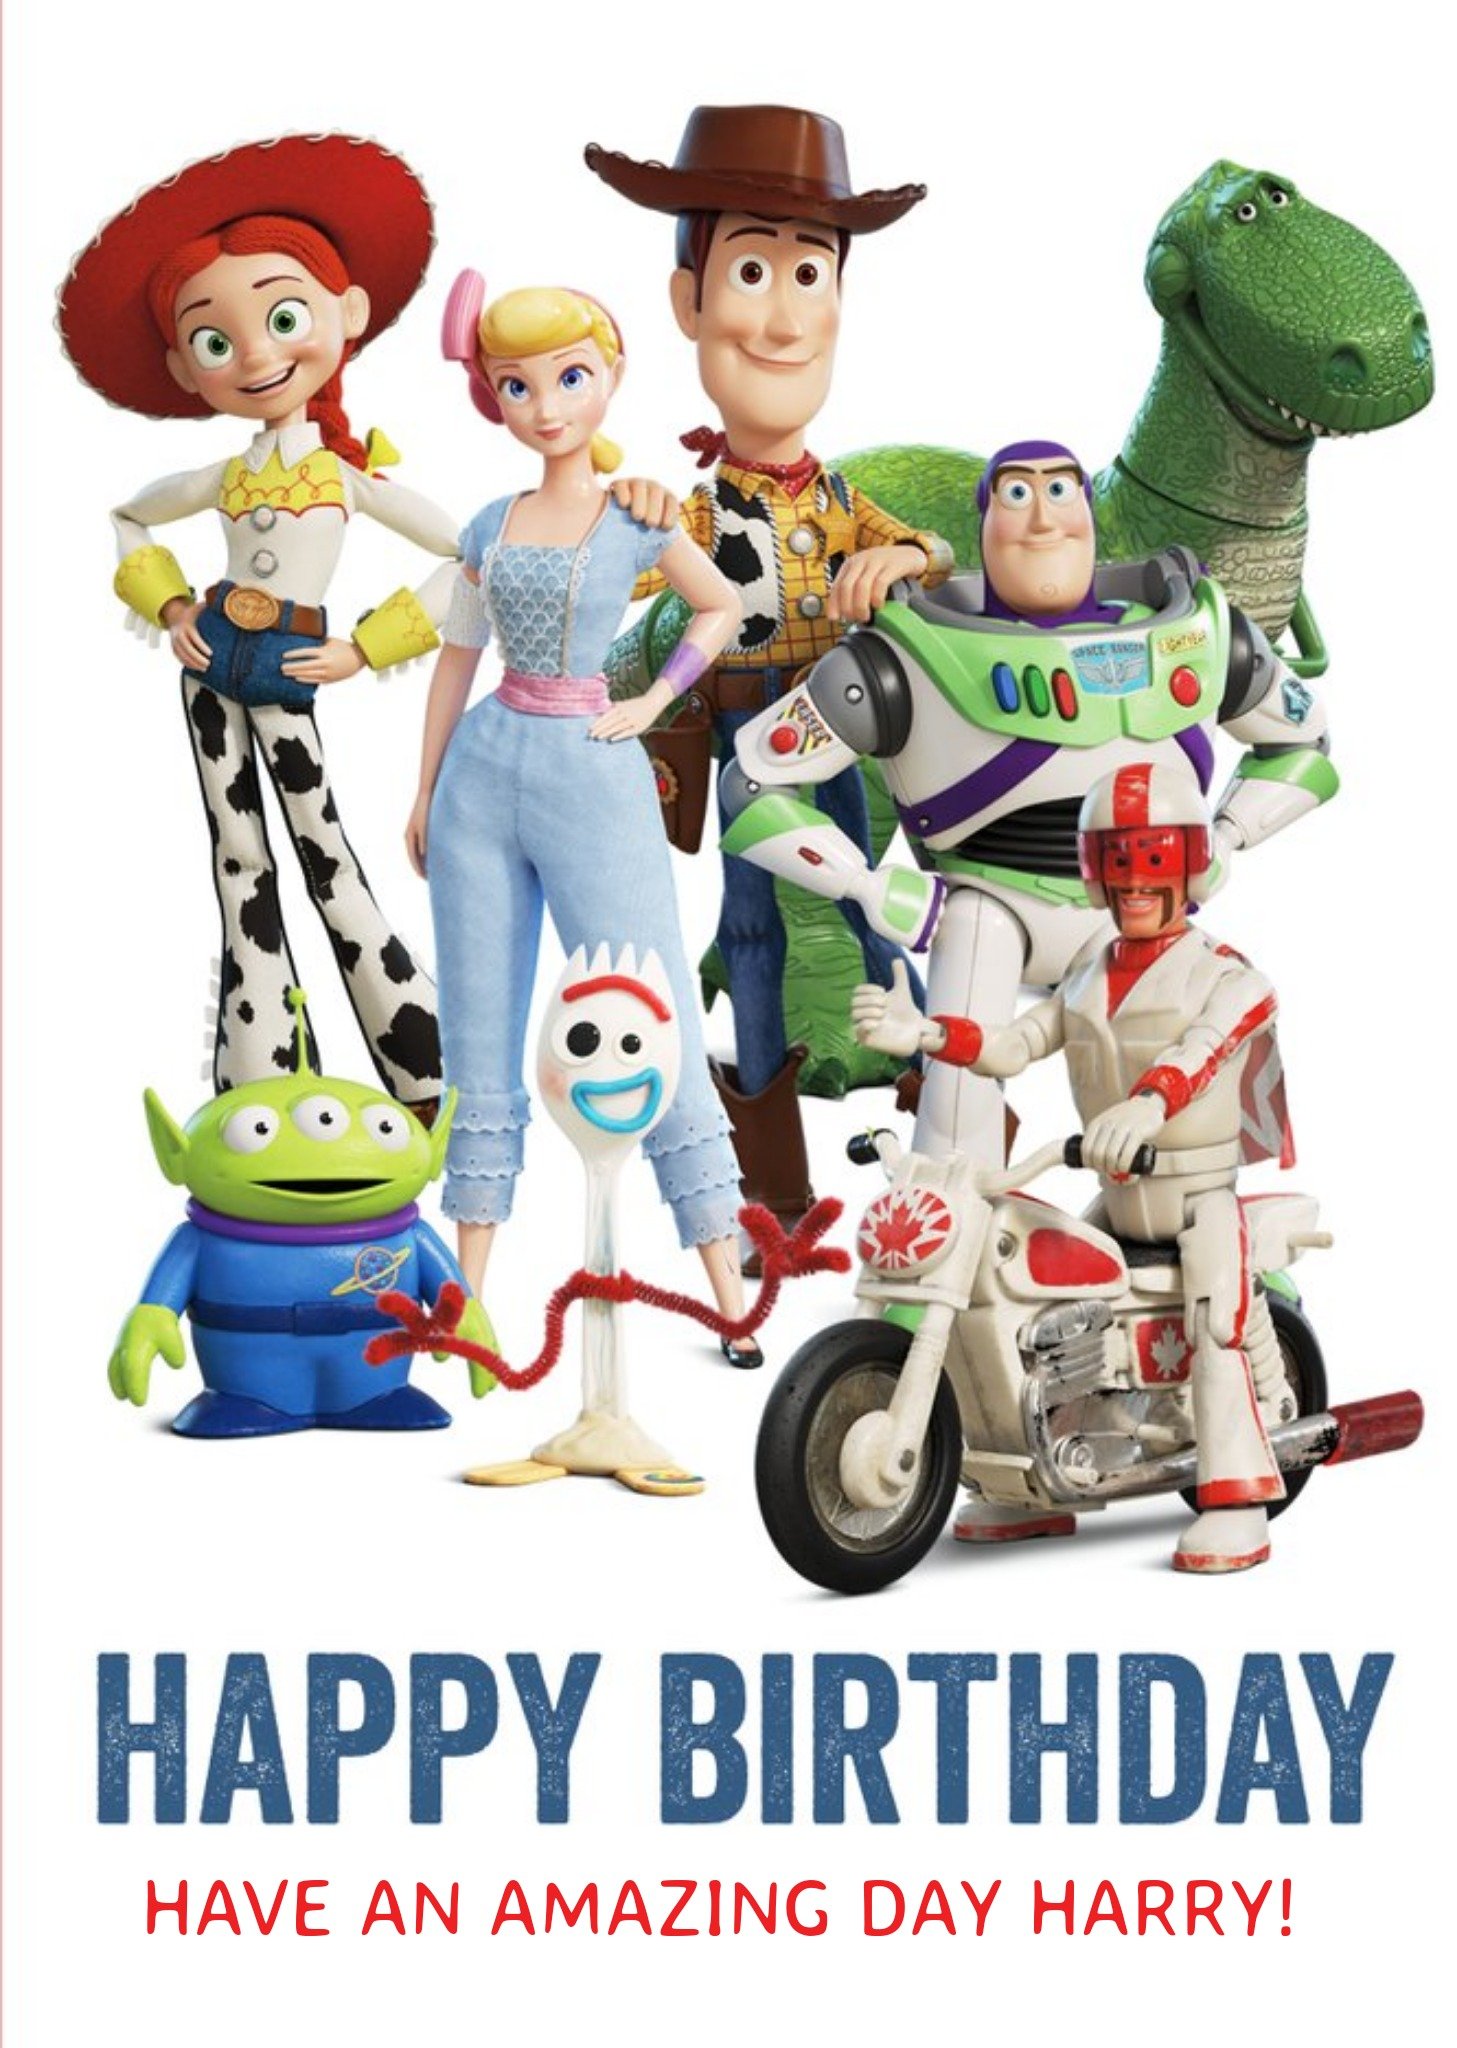 Toy Story 4 Characters - Birthday Card, Large